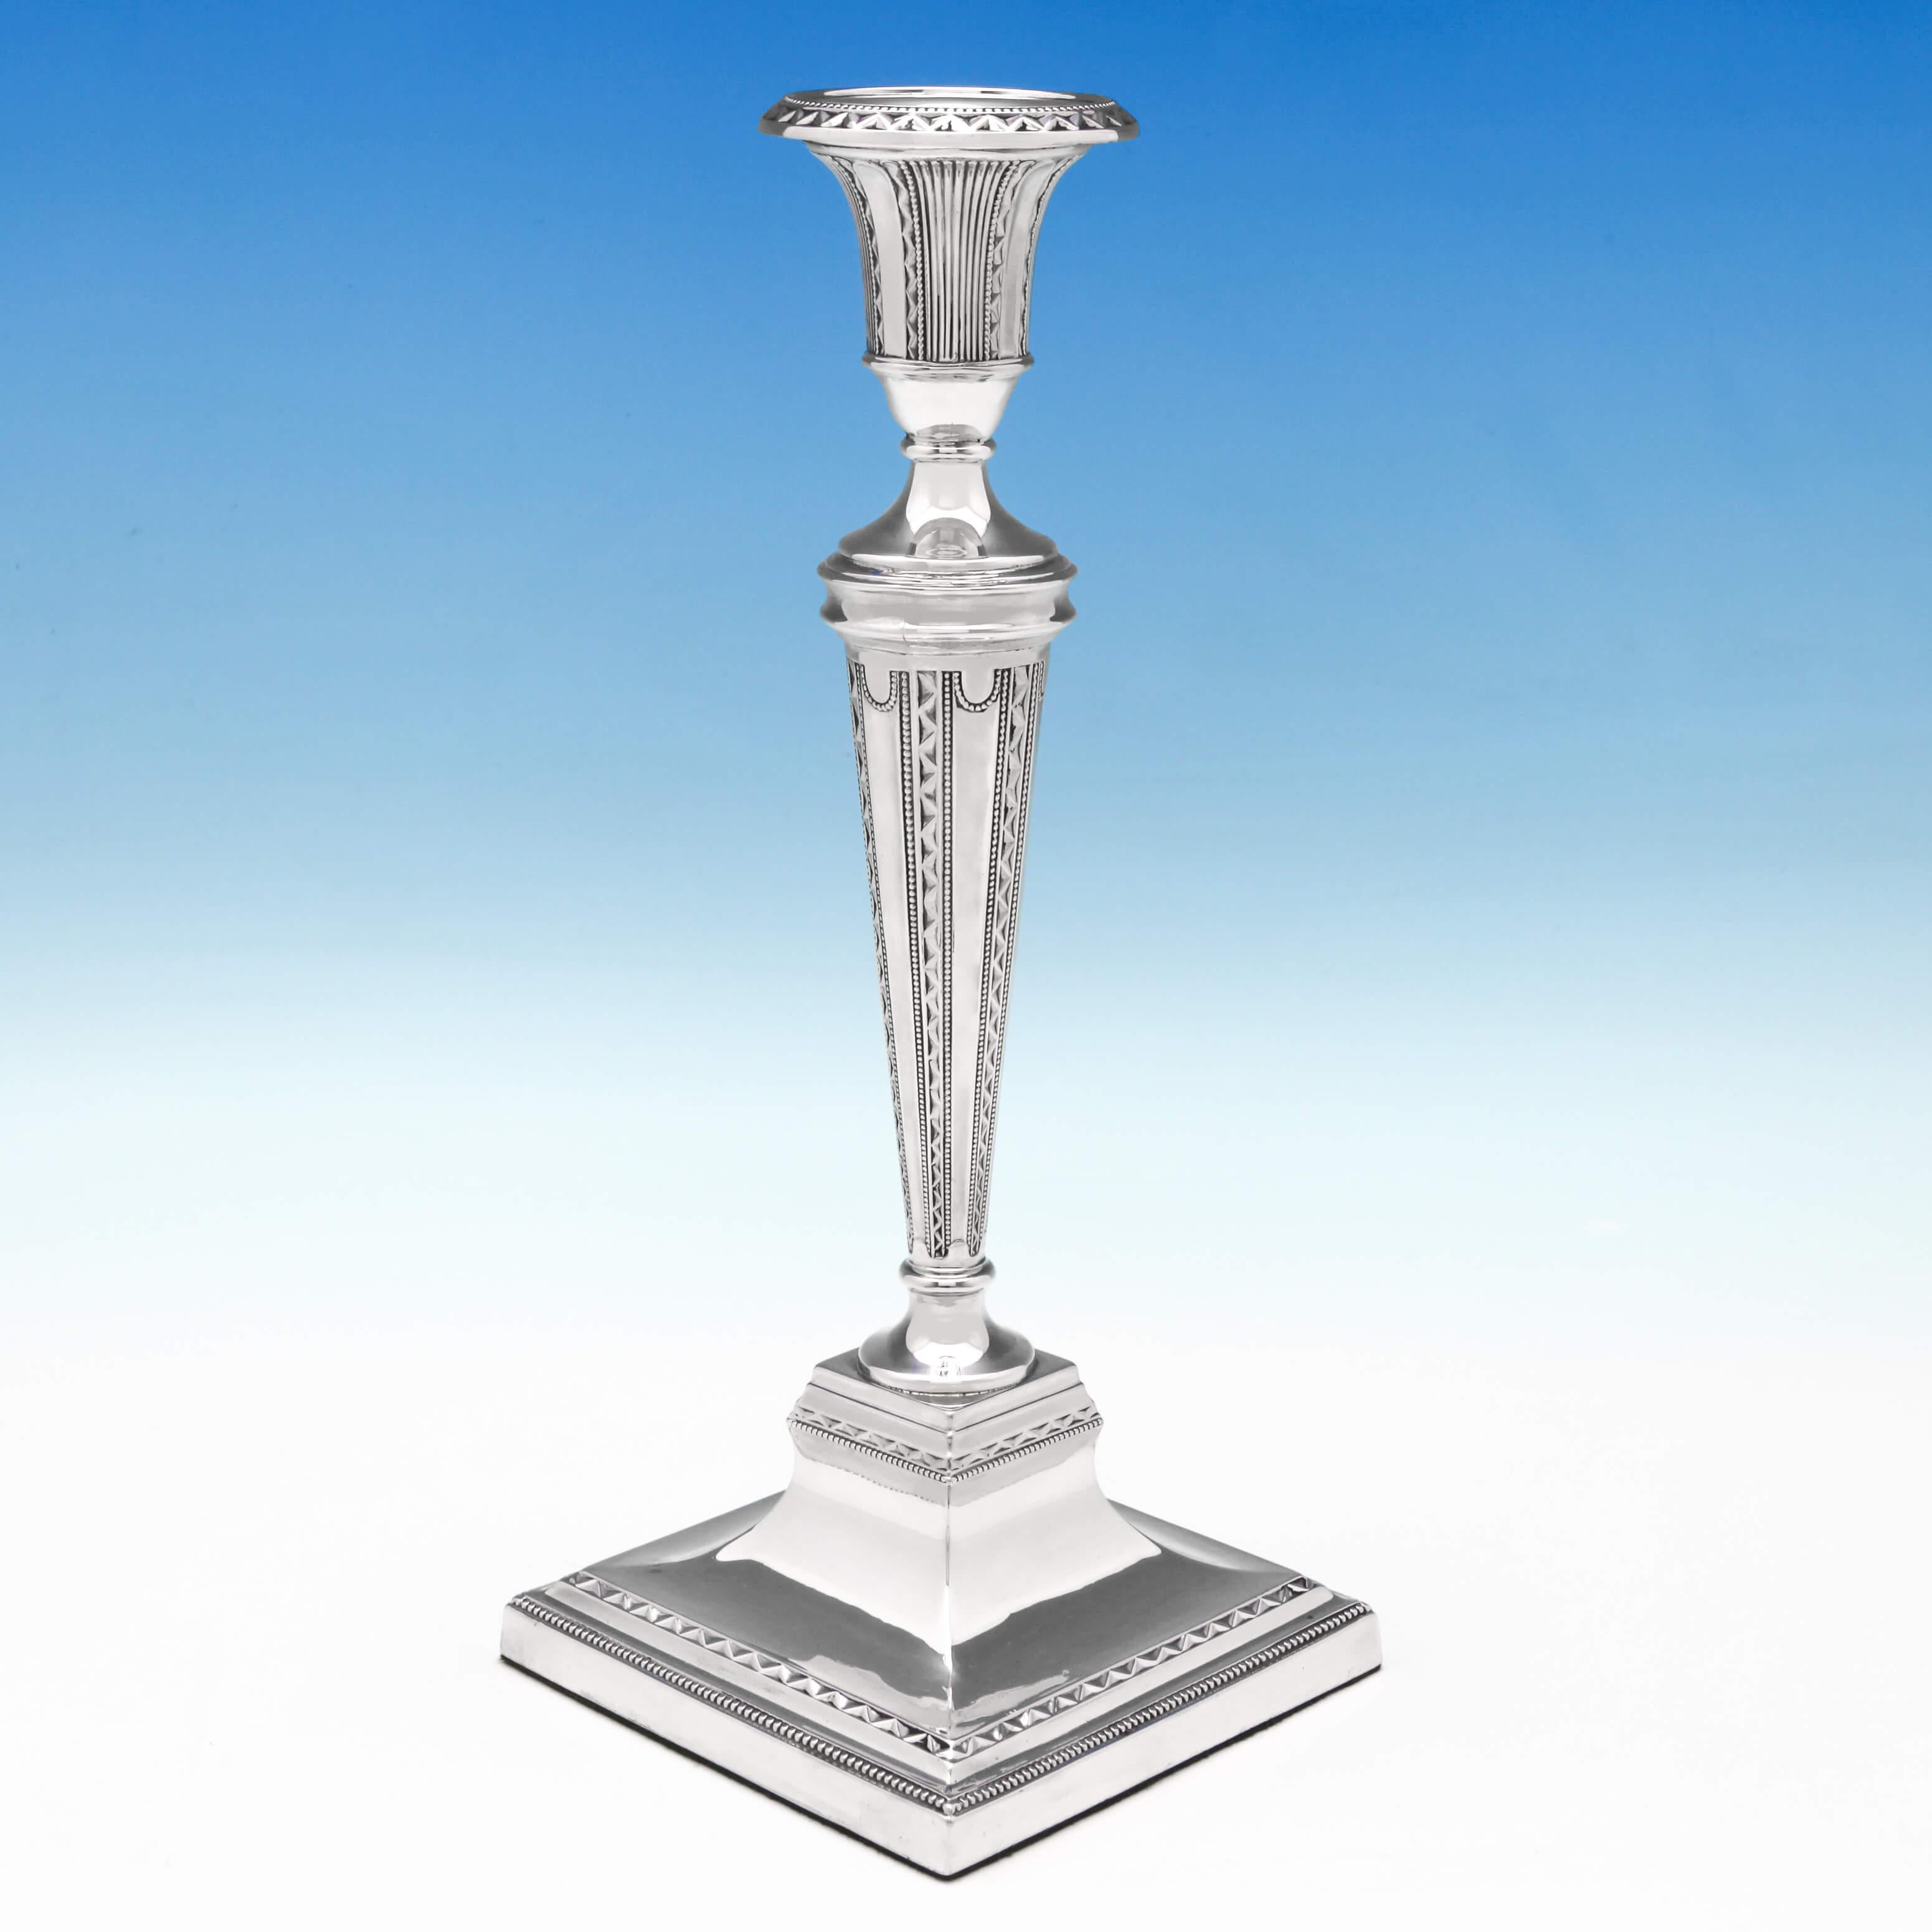 Hallmarked in London in 1893 by Turner Bradbury, this very attractive, Victorian, antique, sterling silver pair of candlesticks, feature zig zag and bead decoration, and removable sconces. Each candlestick measures 11 inches (28cm) tall, by 4.25